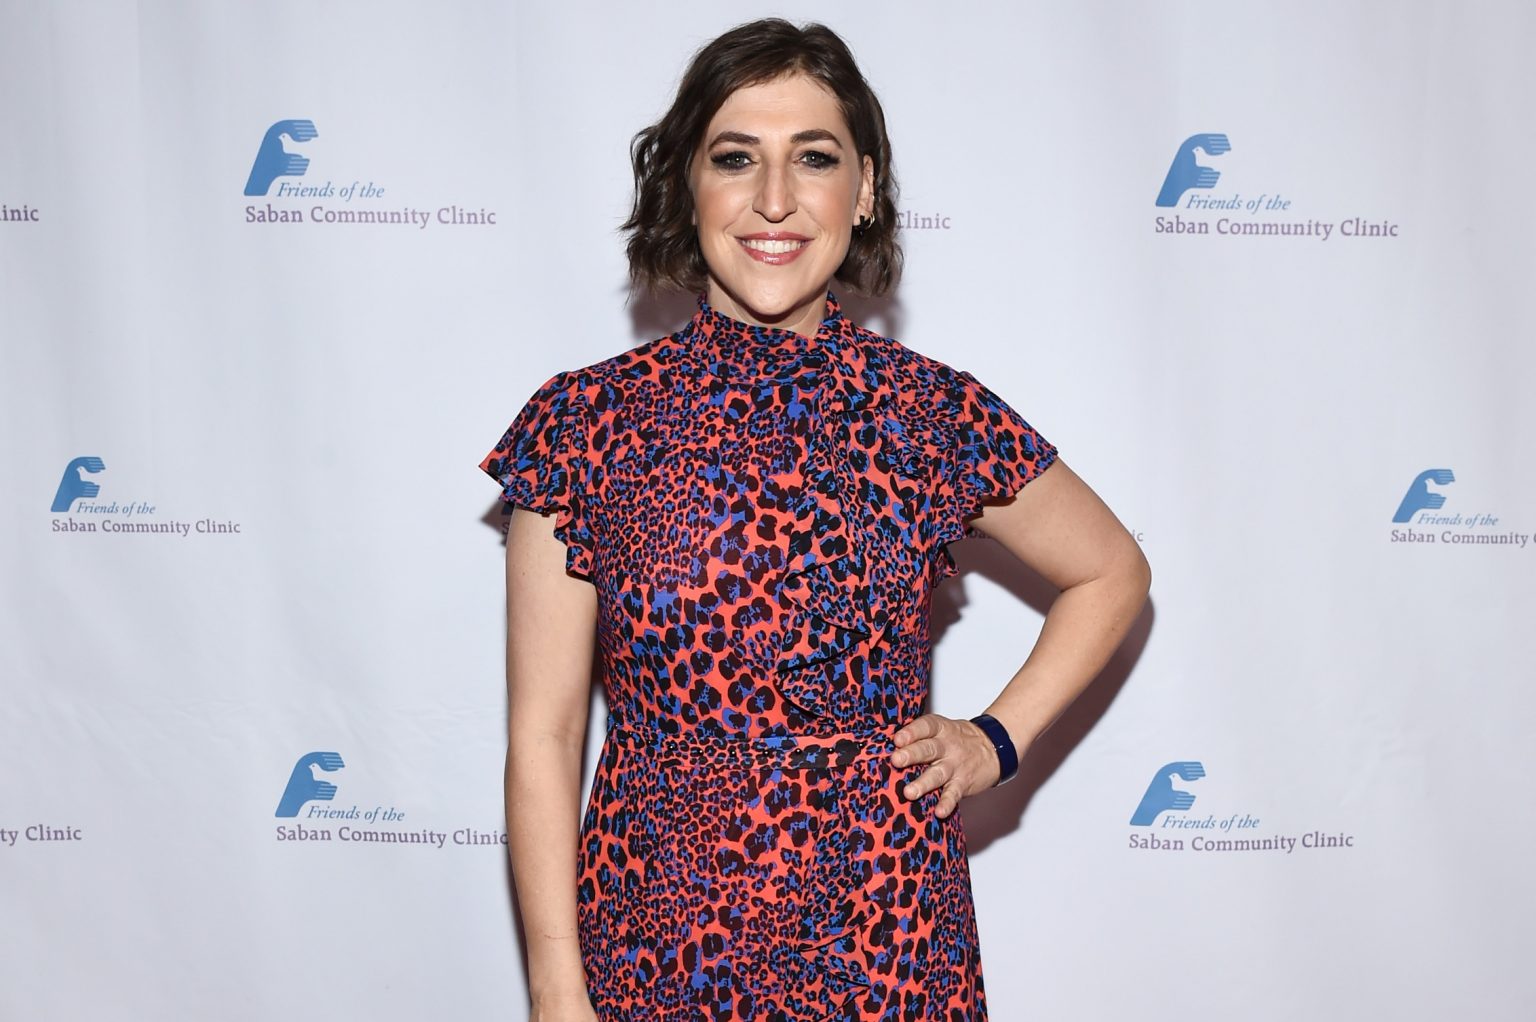 Mayim Bialik Who Is The New Host Of Jeopardy? ABTC